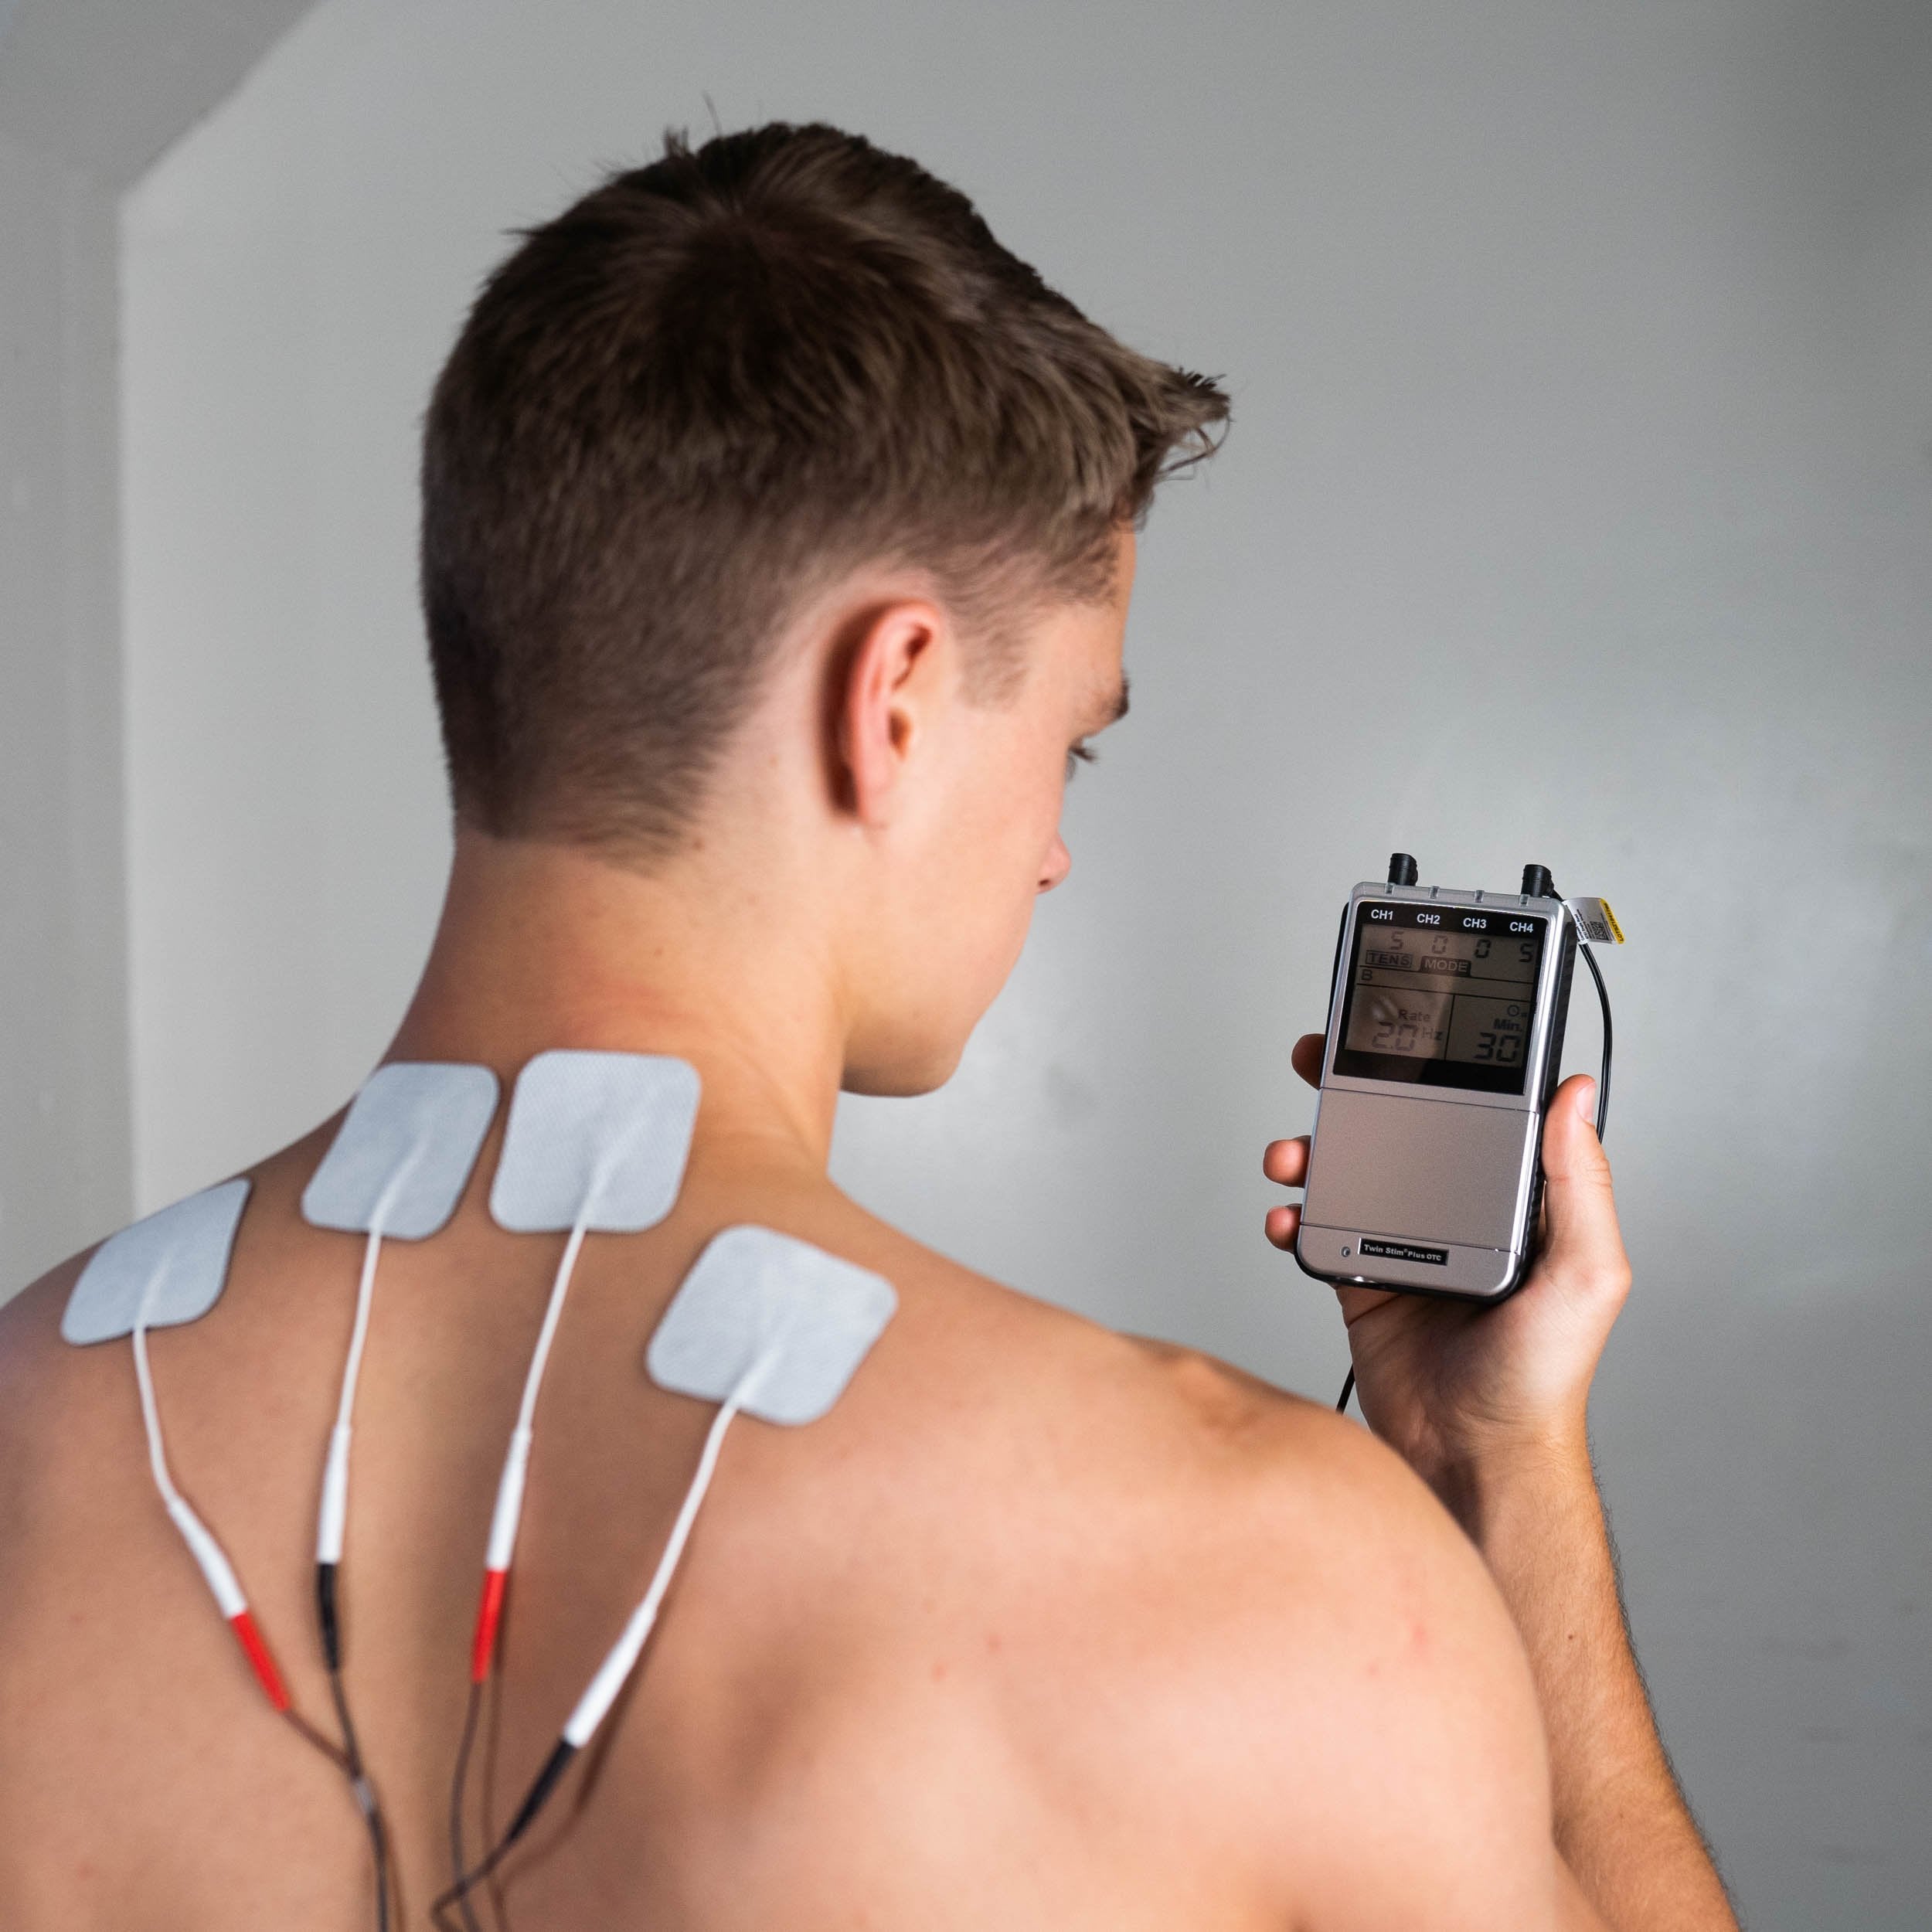 A man holding a TENS unit with electrodes on his upper back